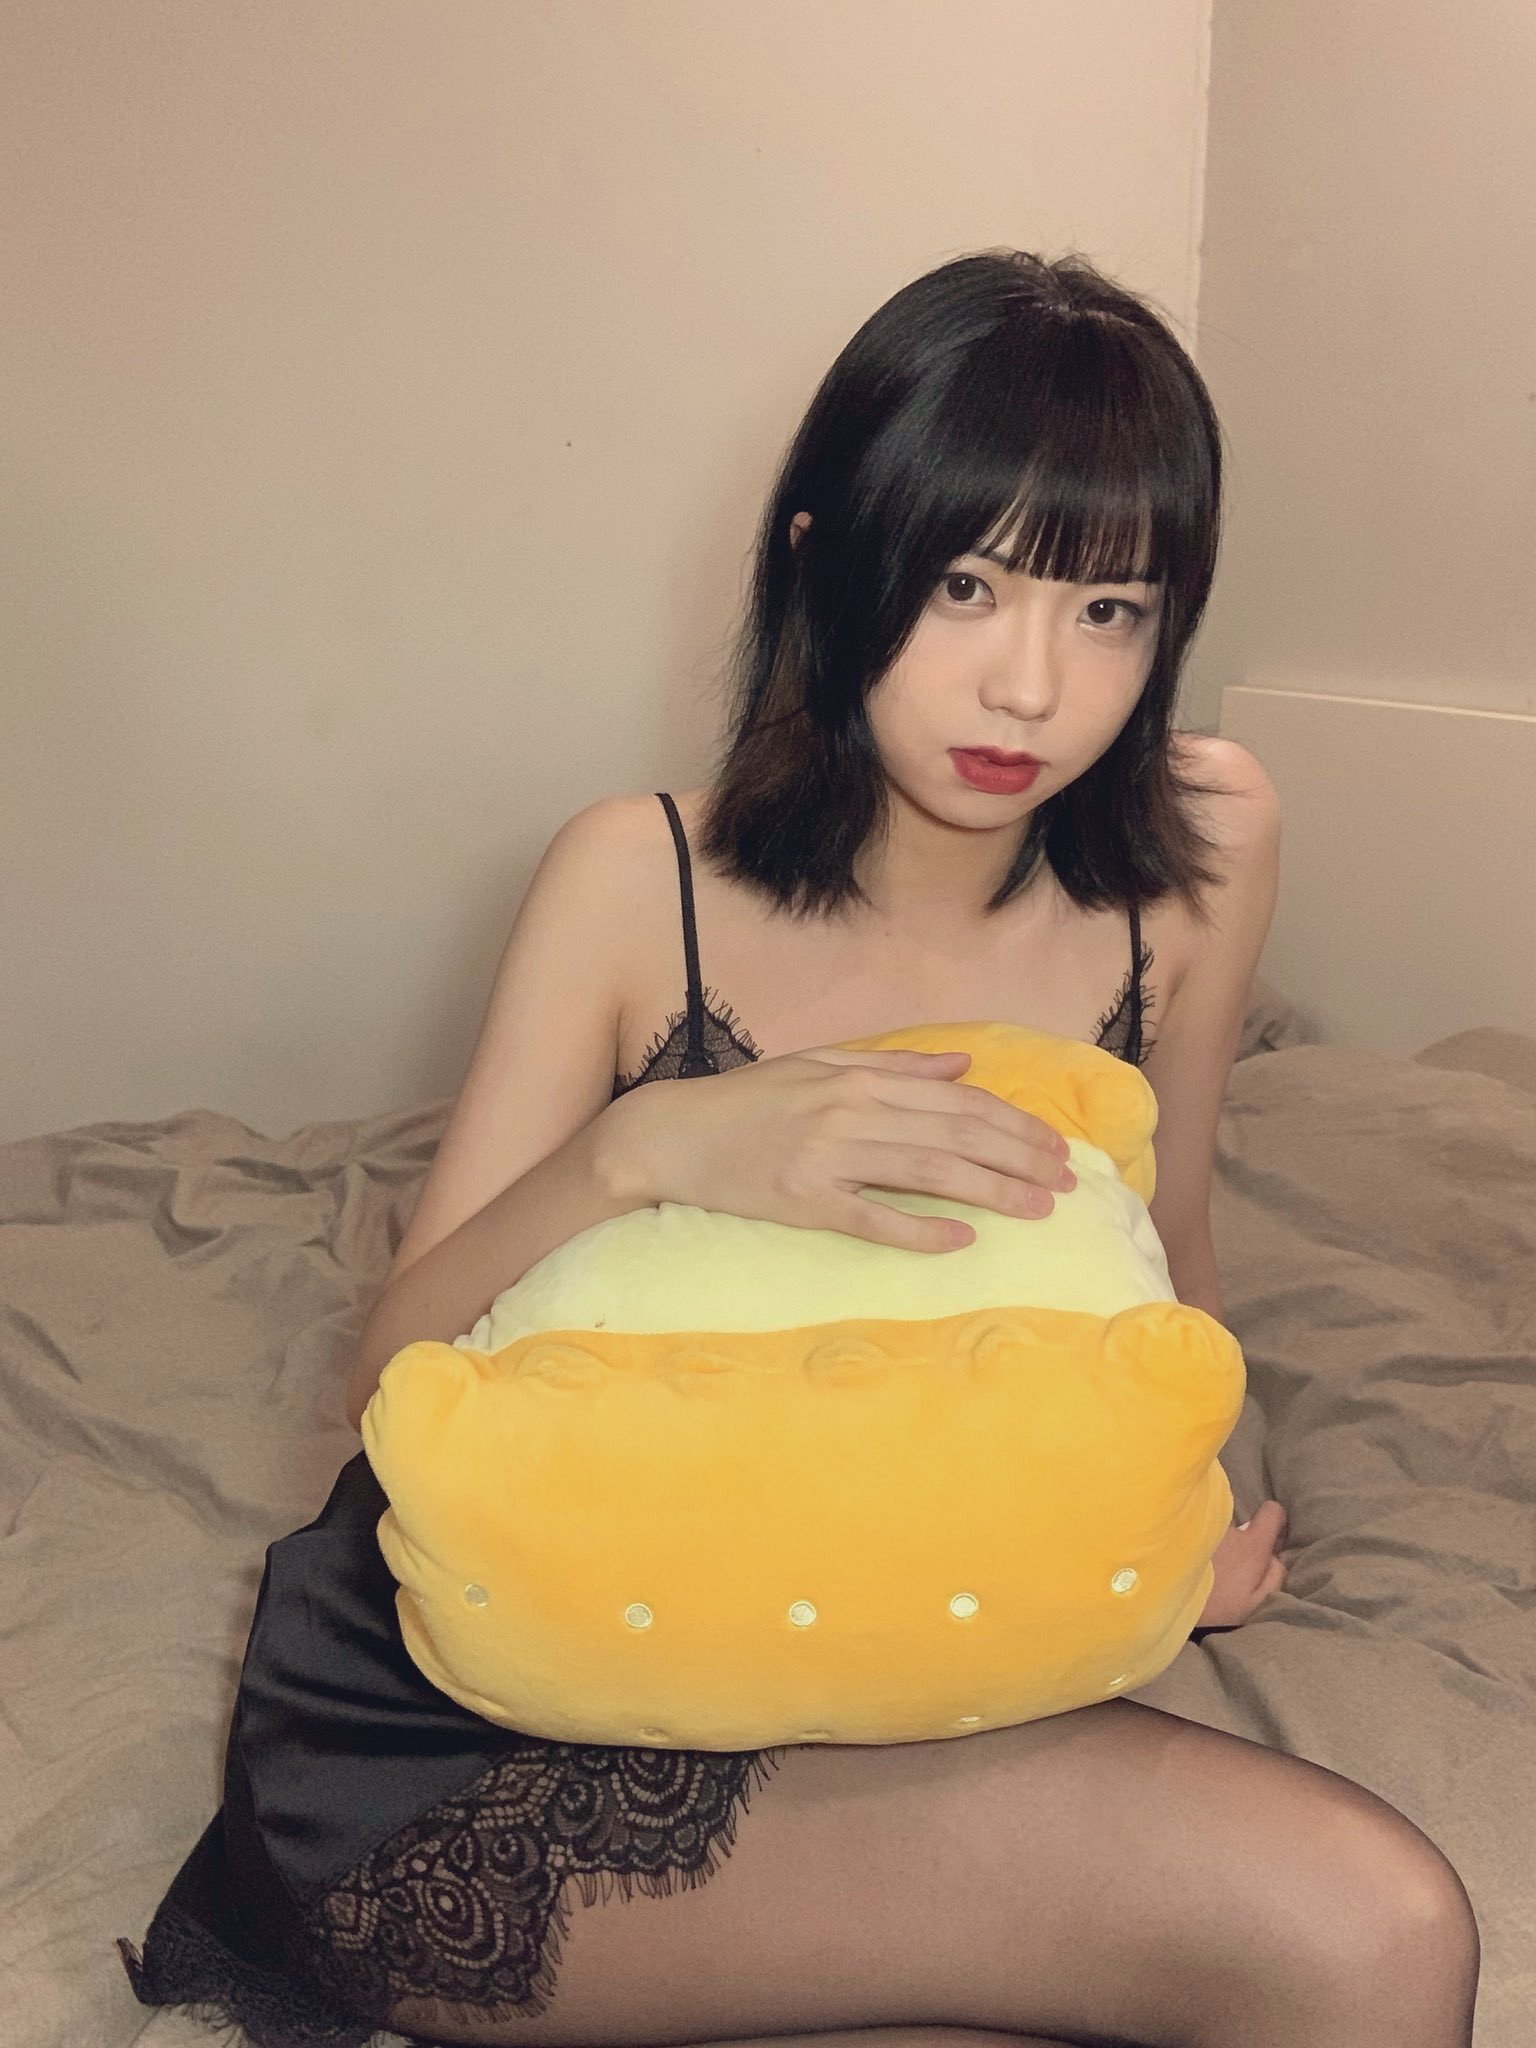 Photo by romaintranquille with the username @romaintranquille,  May 31, 2022 at 11:22 PM. The post is about the topic Chinese crossdressers and the text says 'Her Twitter username is meizaijiang #ChineseCD #AsianCD #Crossdresser'